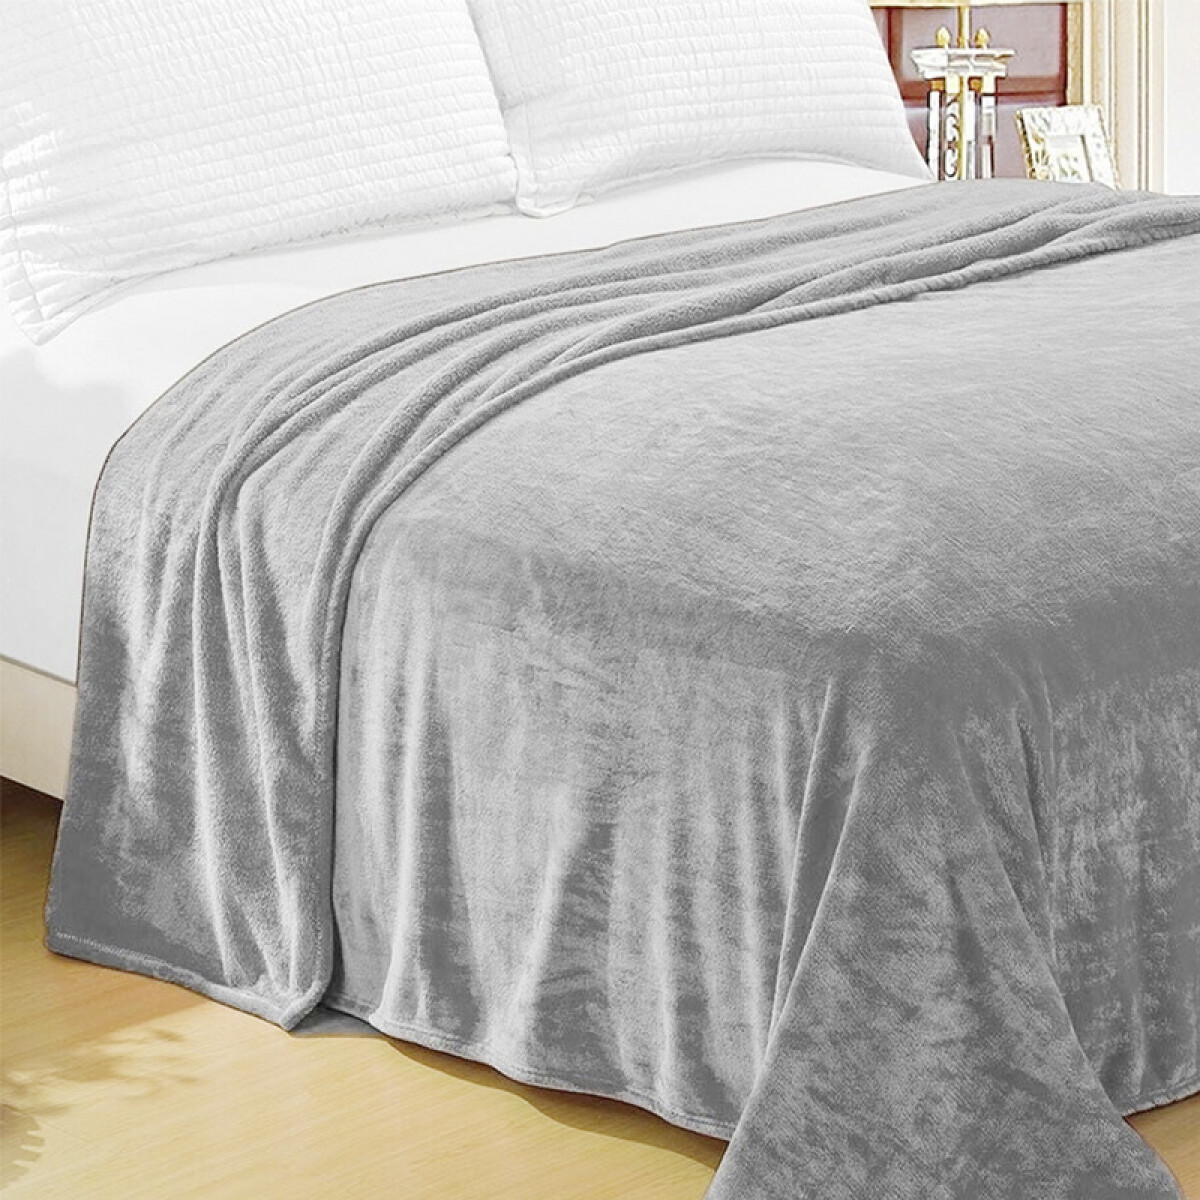 Frazada Flannel King Size Home Class 240 x 260 cm - GRIS 